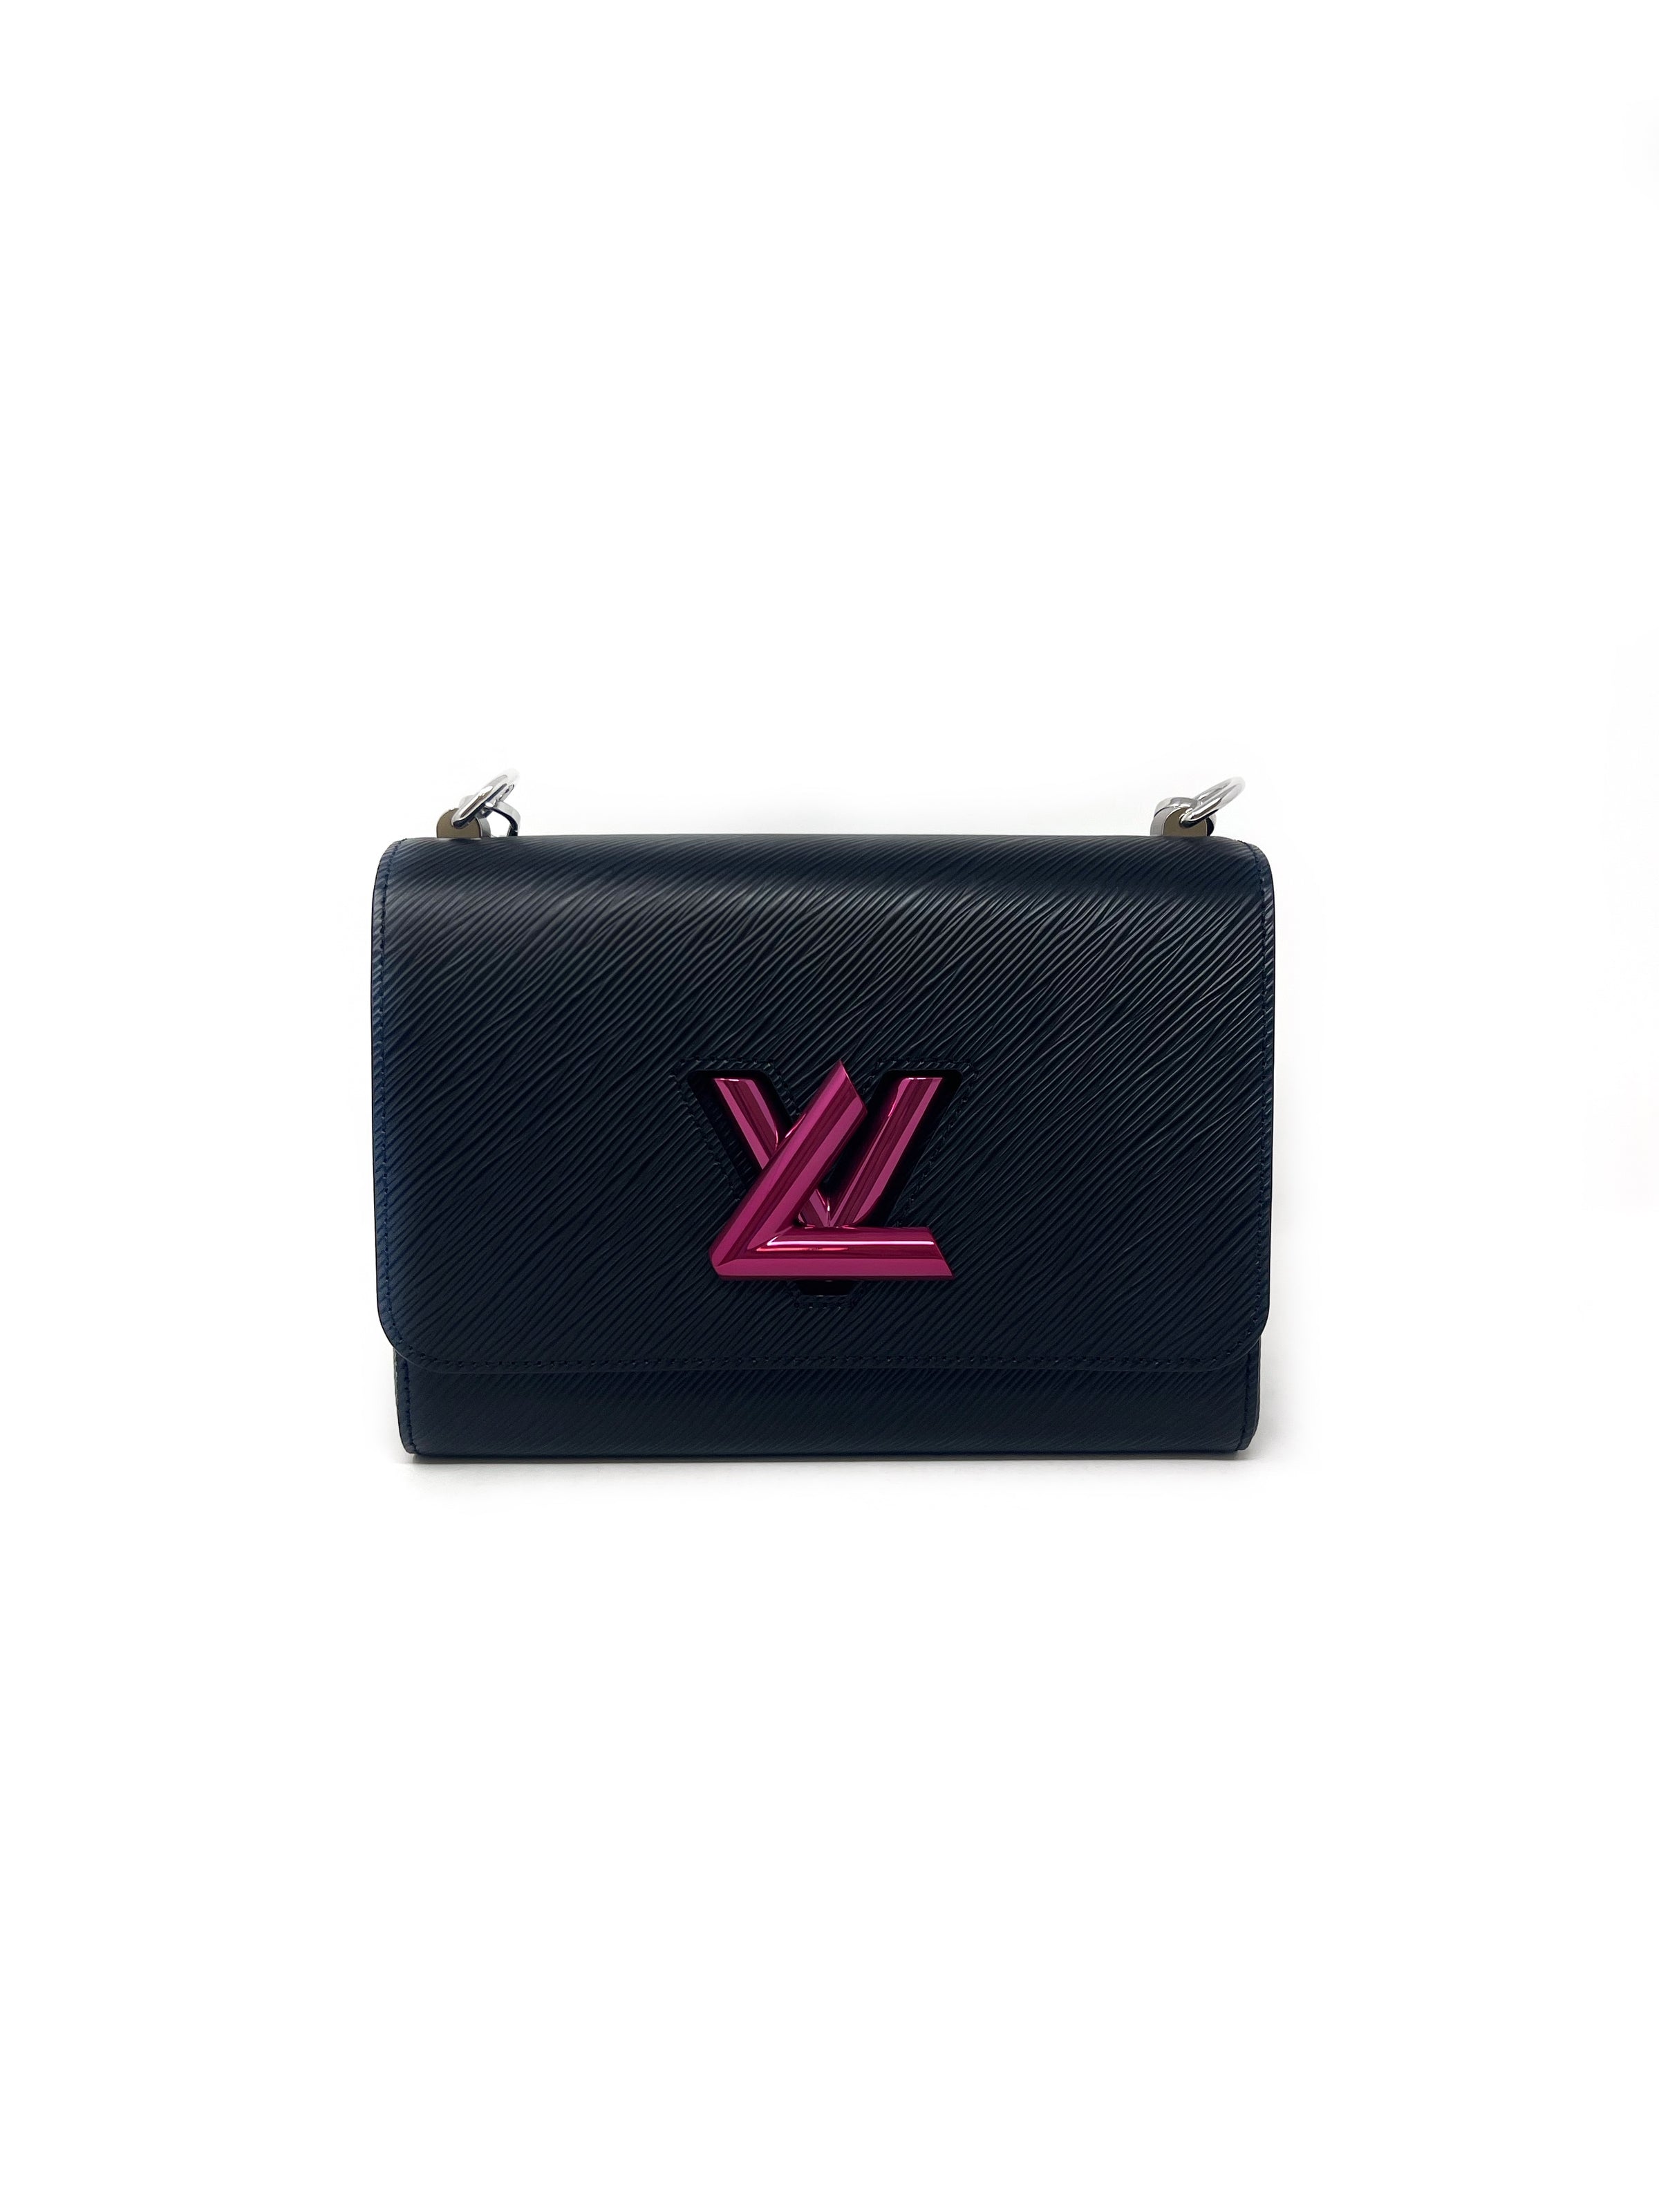 louis vuitton pink and black purse